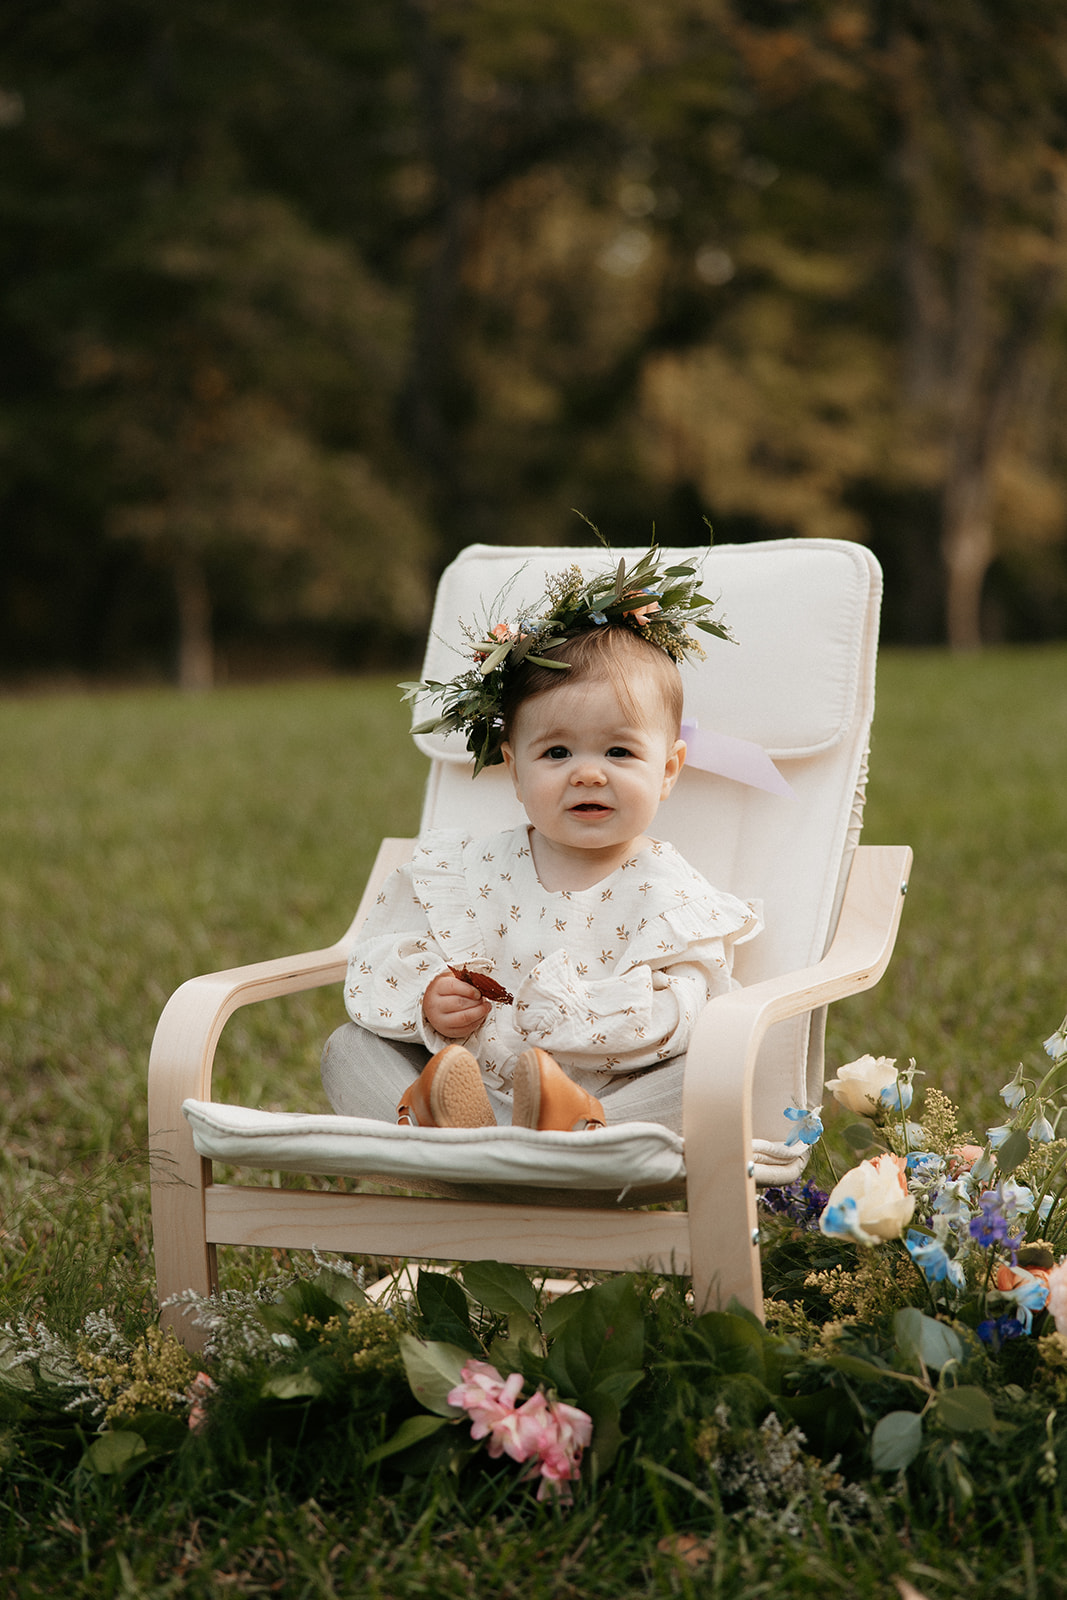 A one year old celebrates with her flower crown.